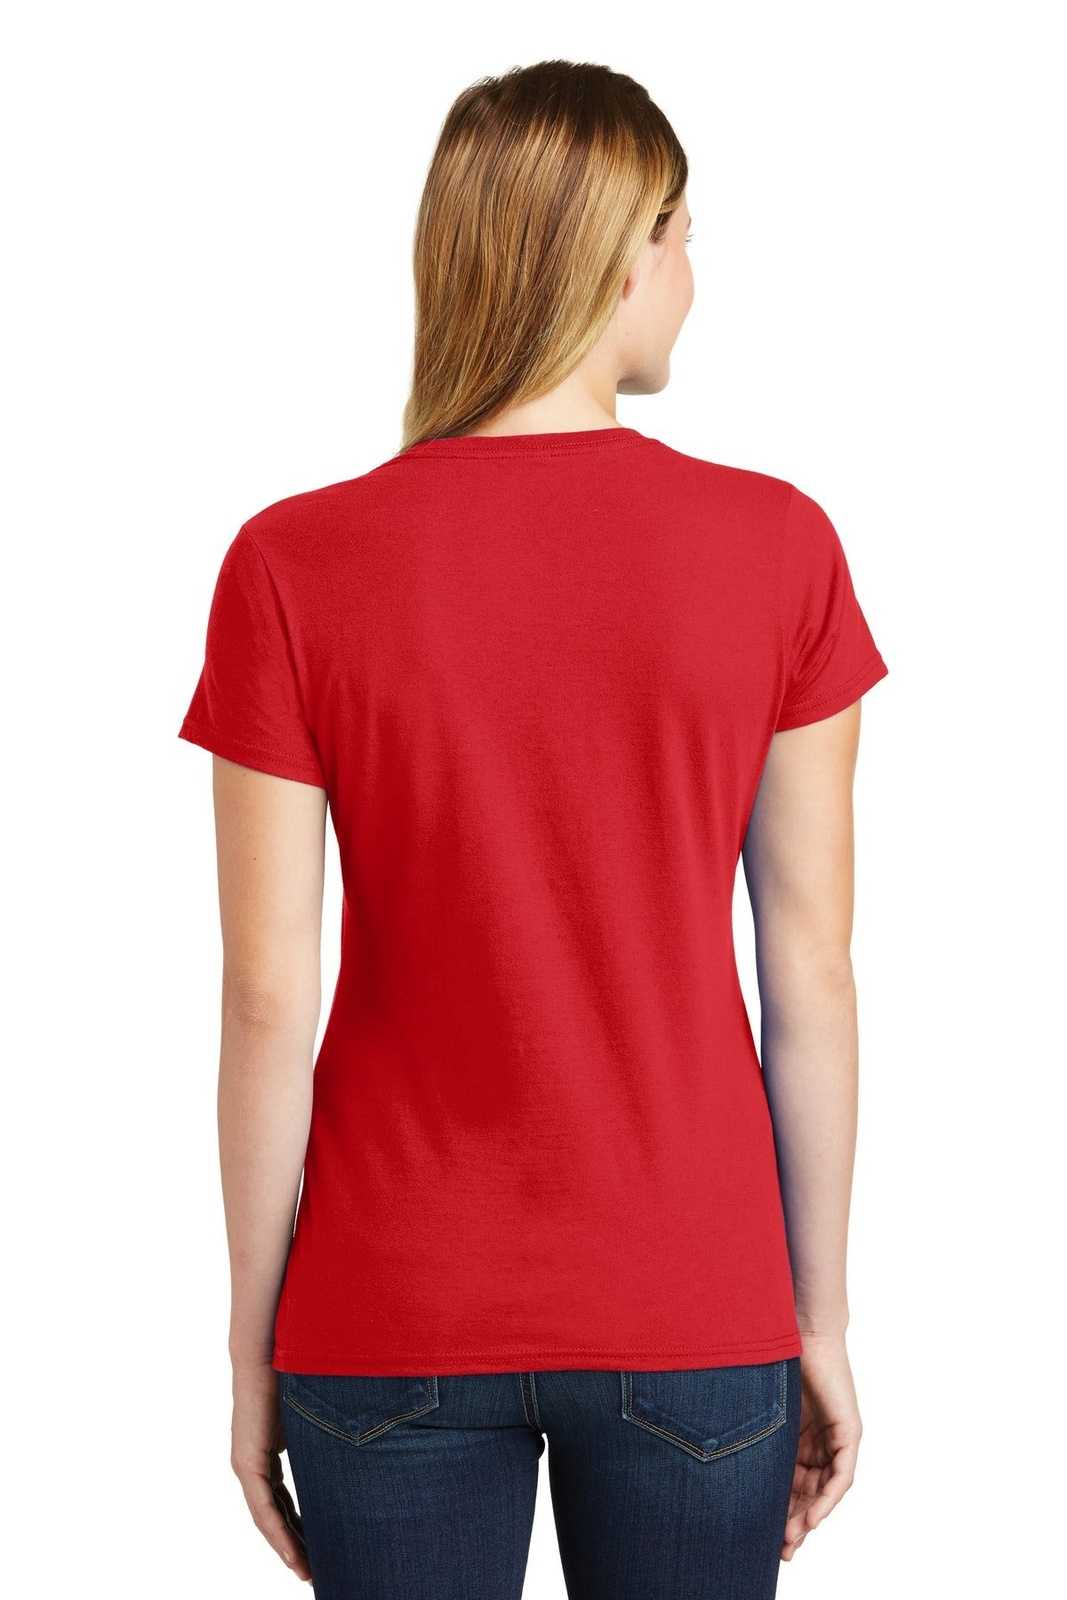 Port &amp; Company LPC450 Ladies Fan Favorite Tee - Bright Red - HIT a Double - 2